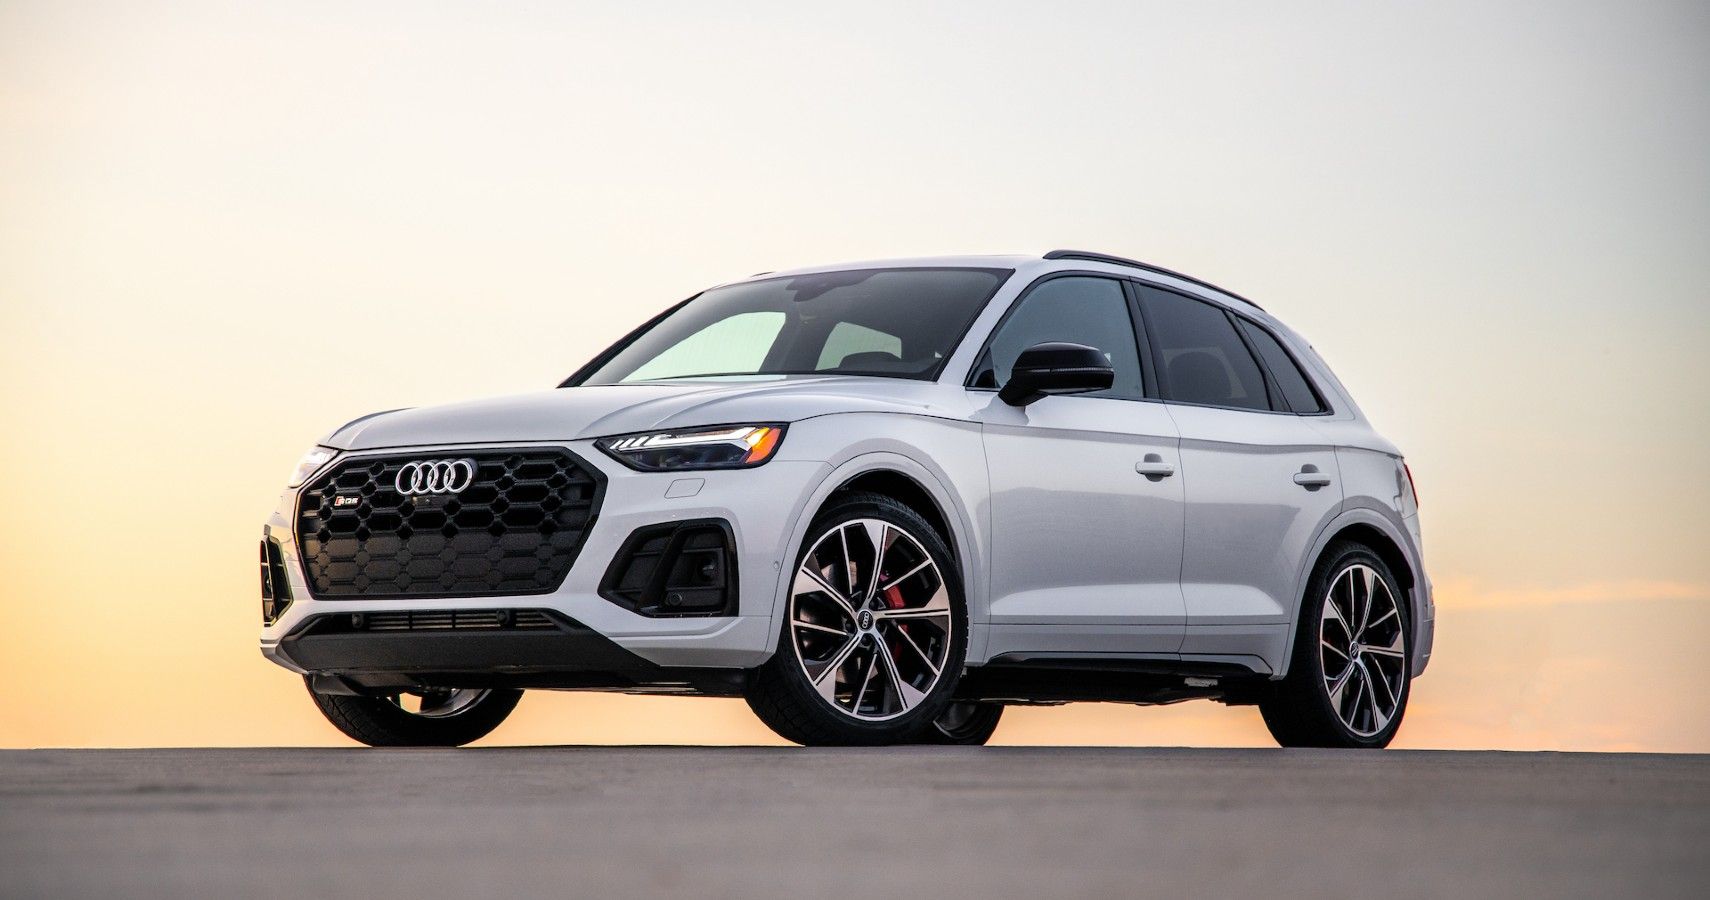 This Is Why The Audi Q5 Is A Good Family SUV